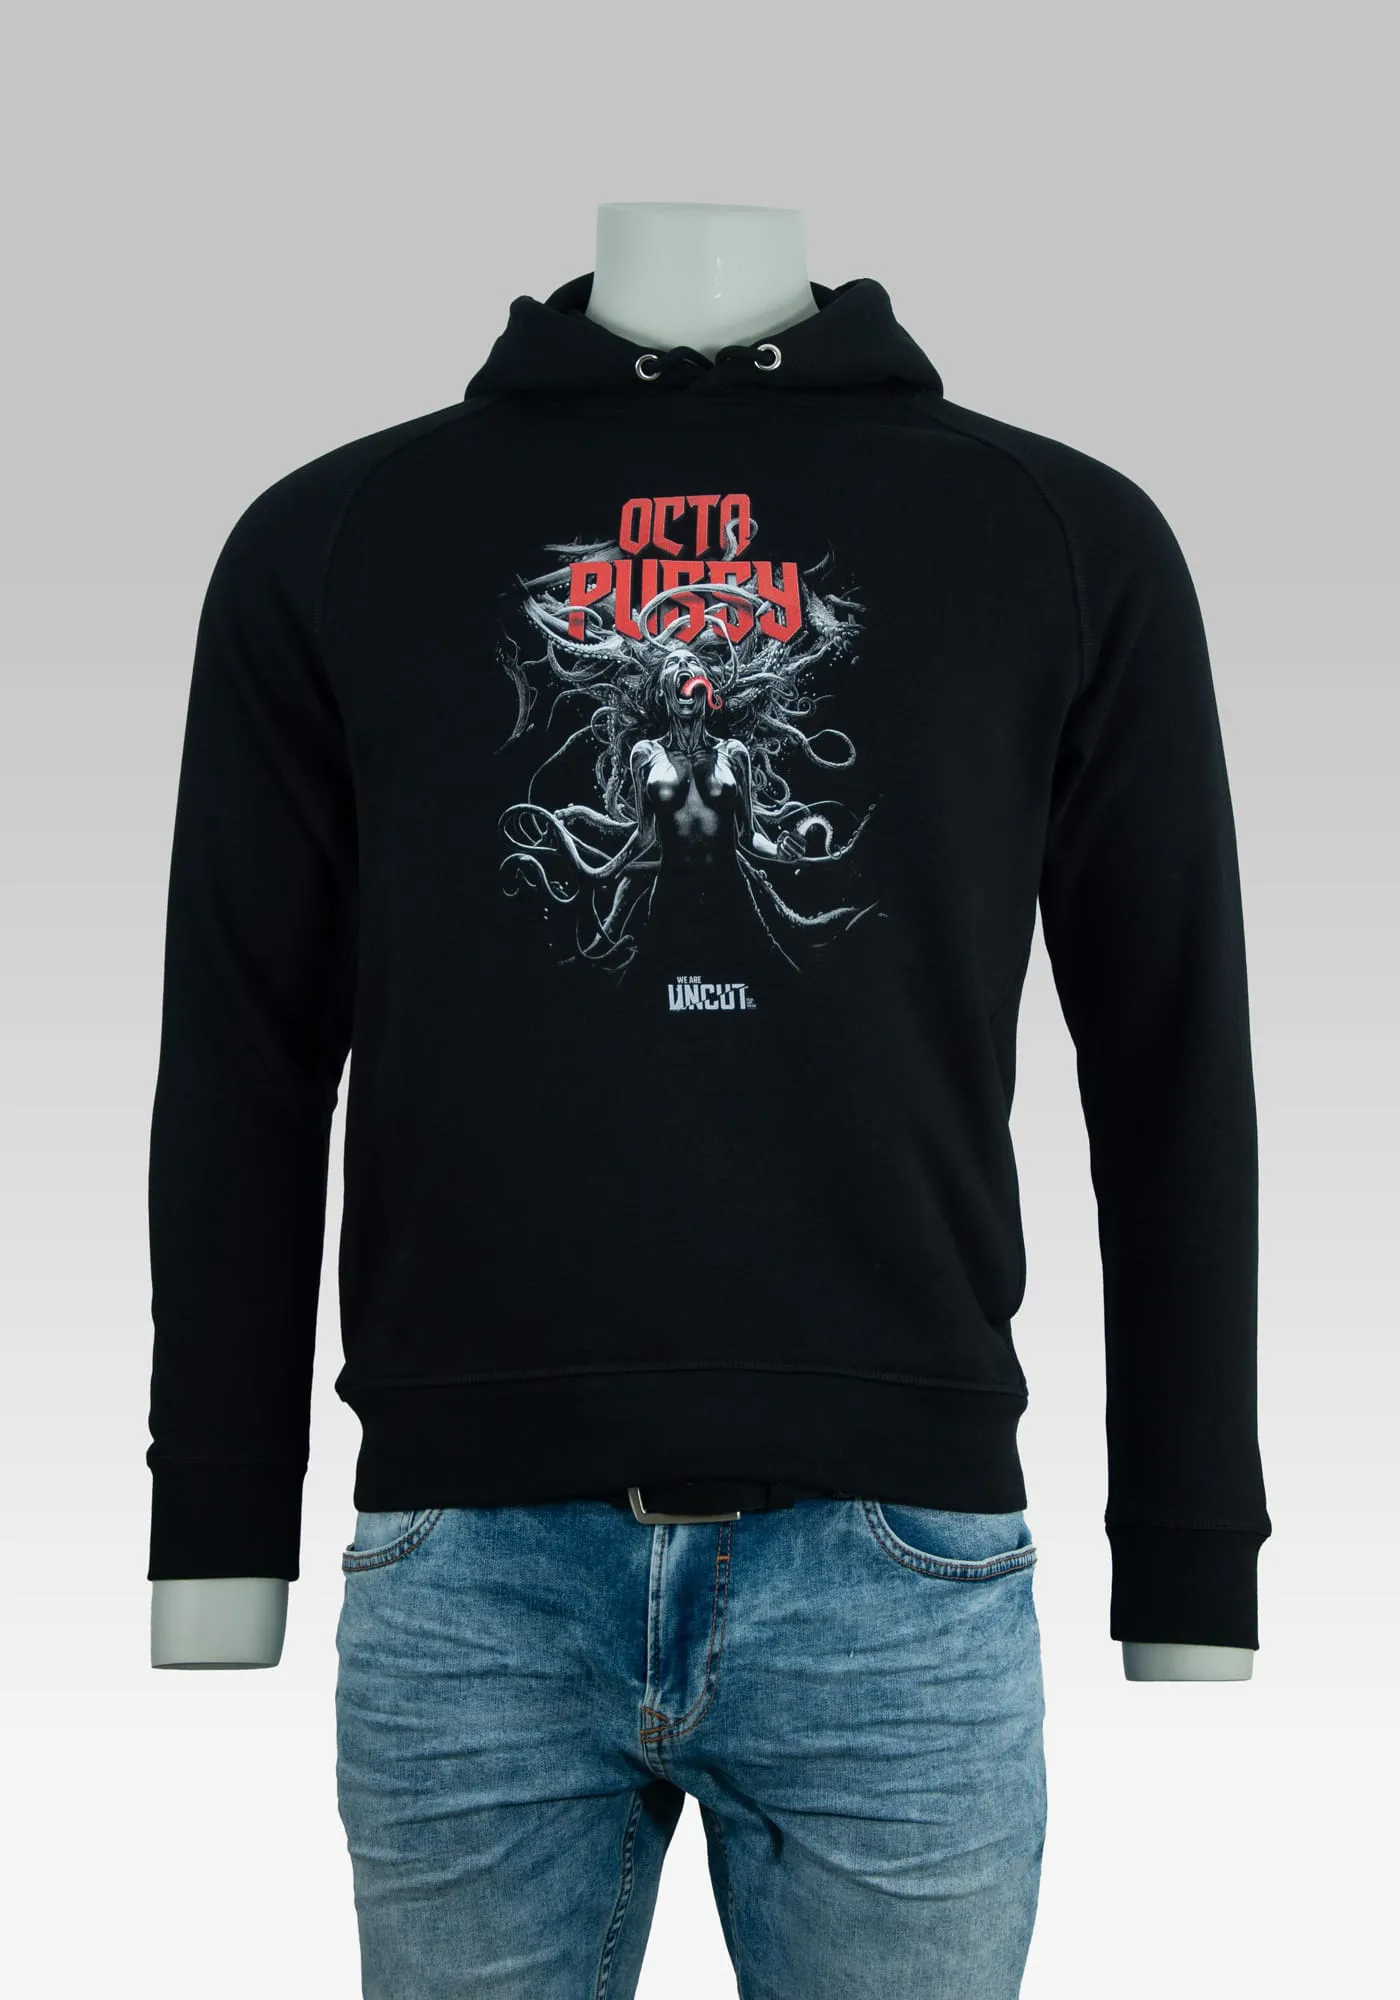 Hoodie Octopussy auf Hollowpuppe in farbe Schwarz frontal